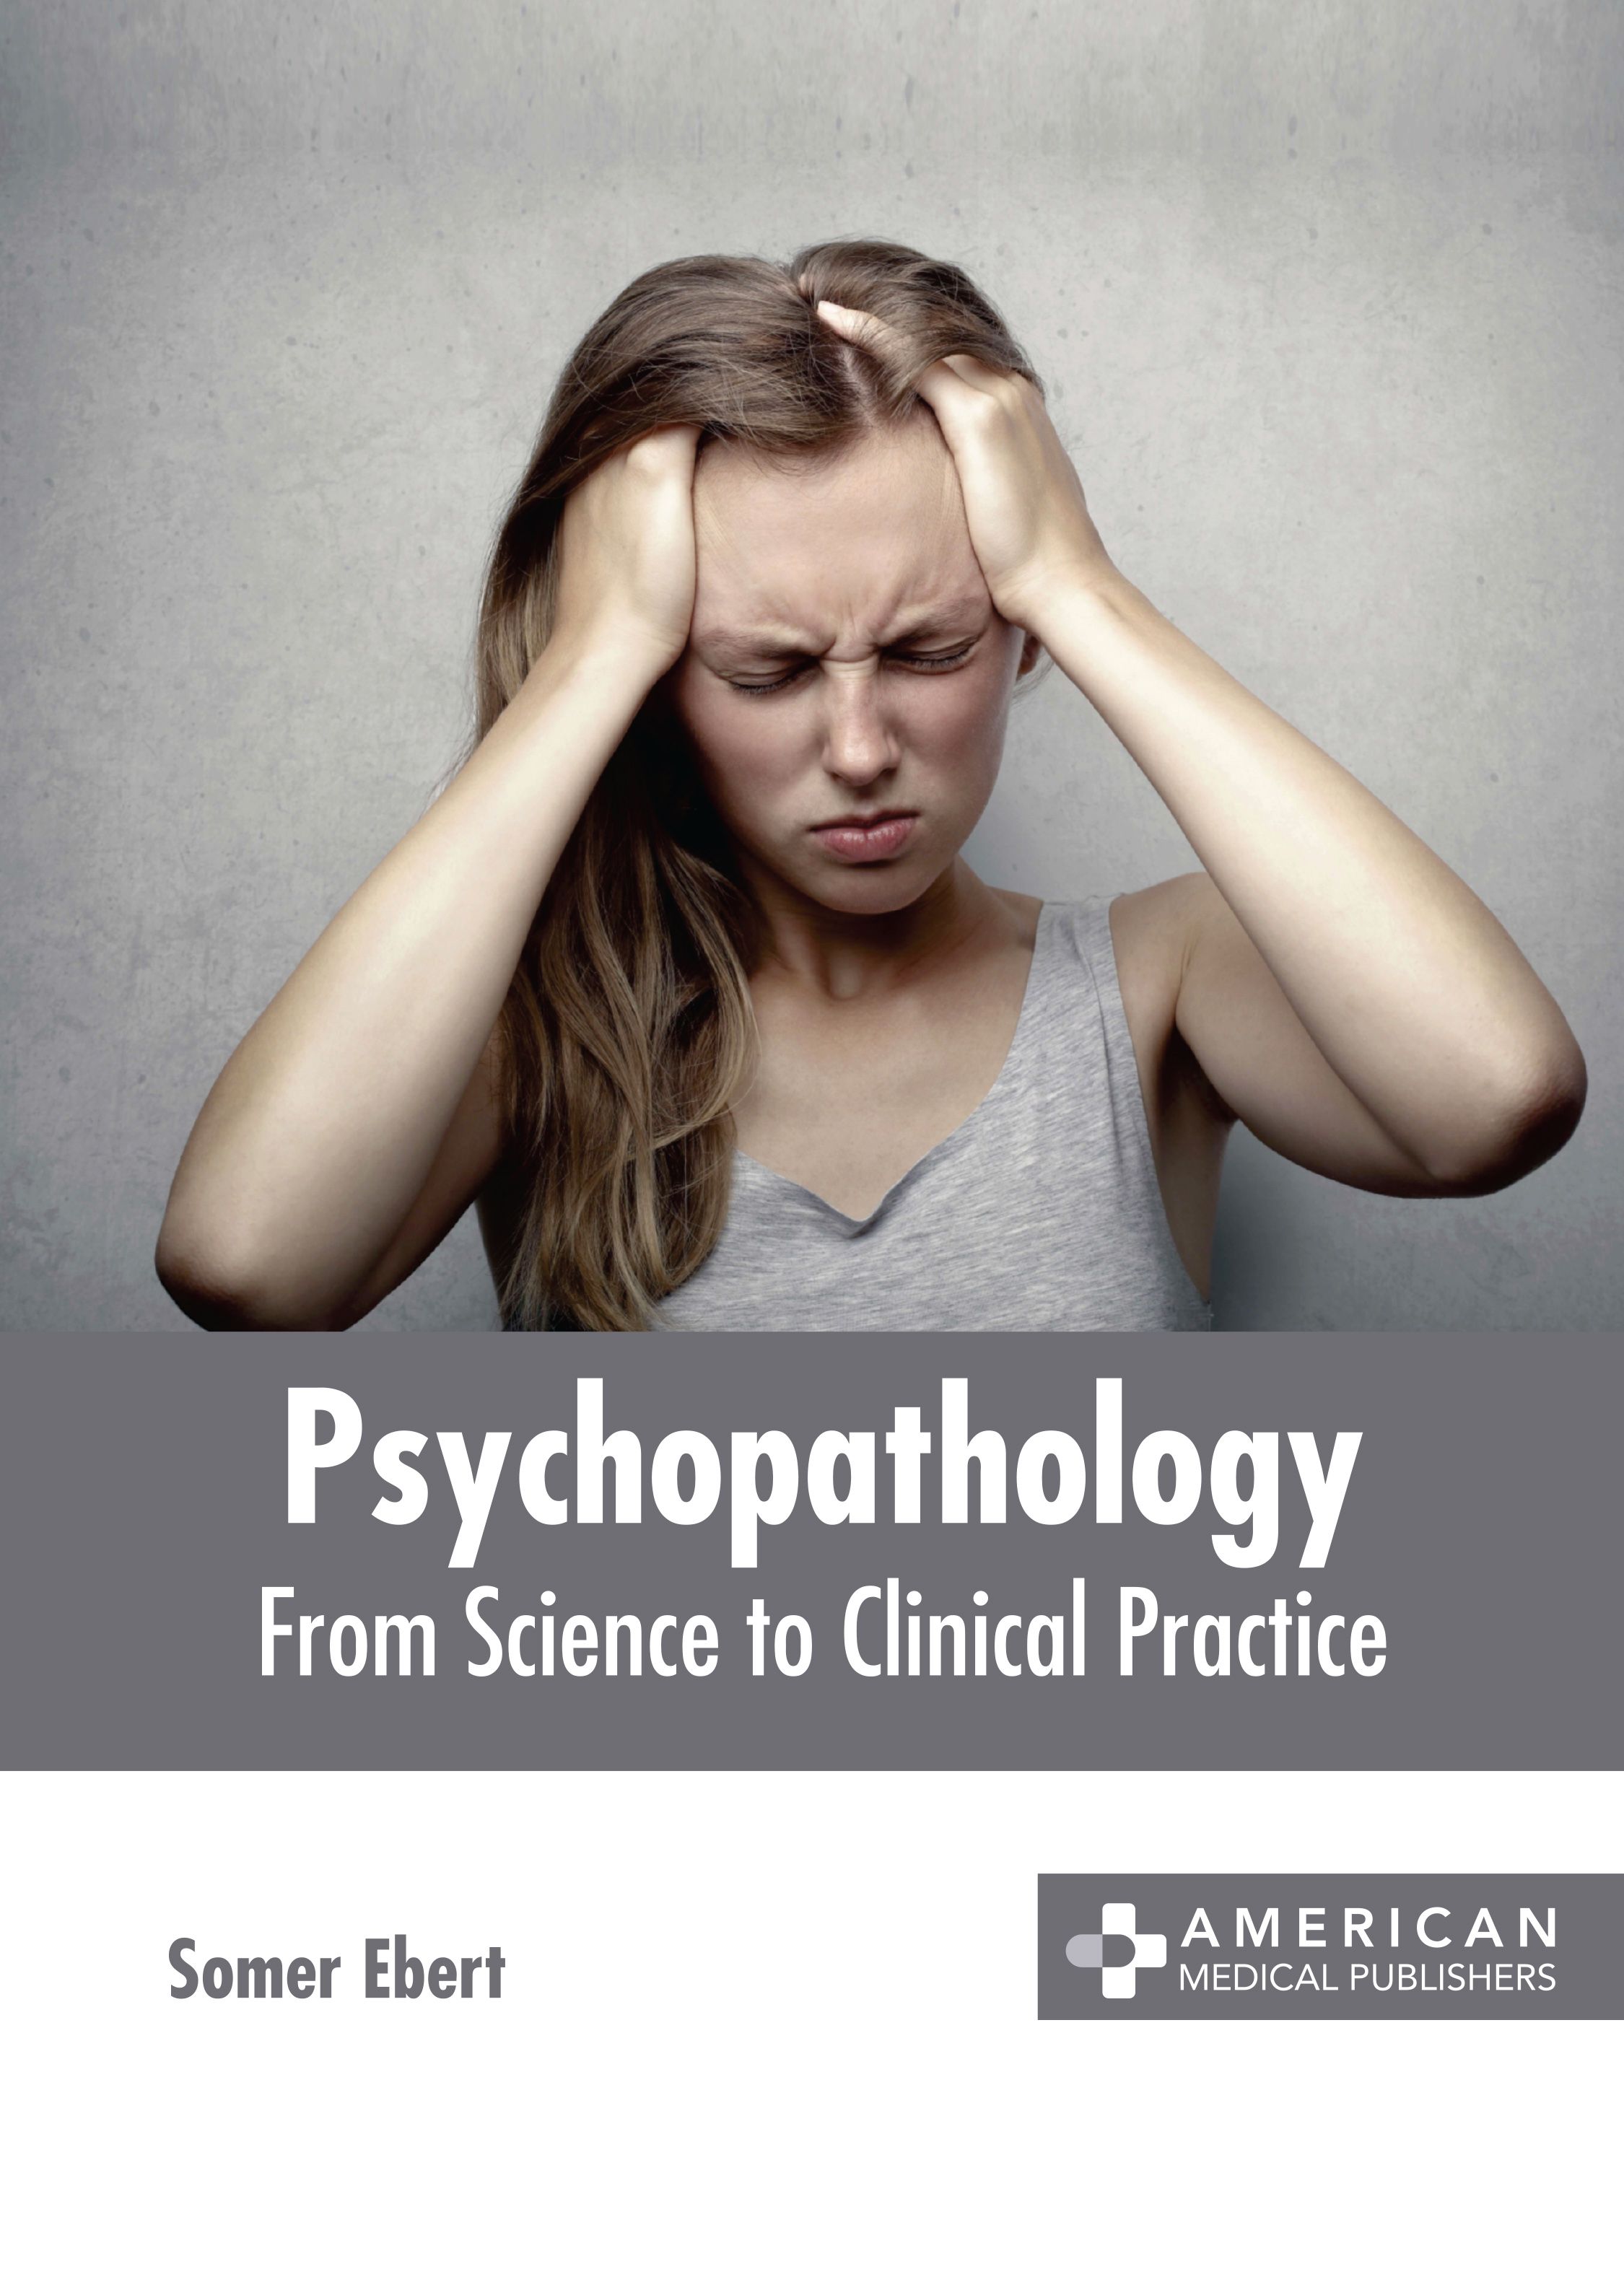 PSYCHOPATHOLOGY: FROM SCIENCE TO CLINICAL PRACTICE